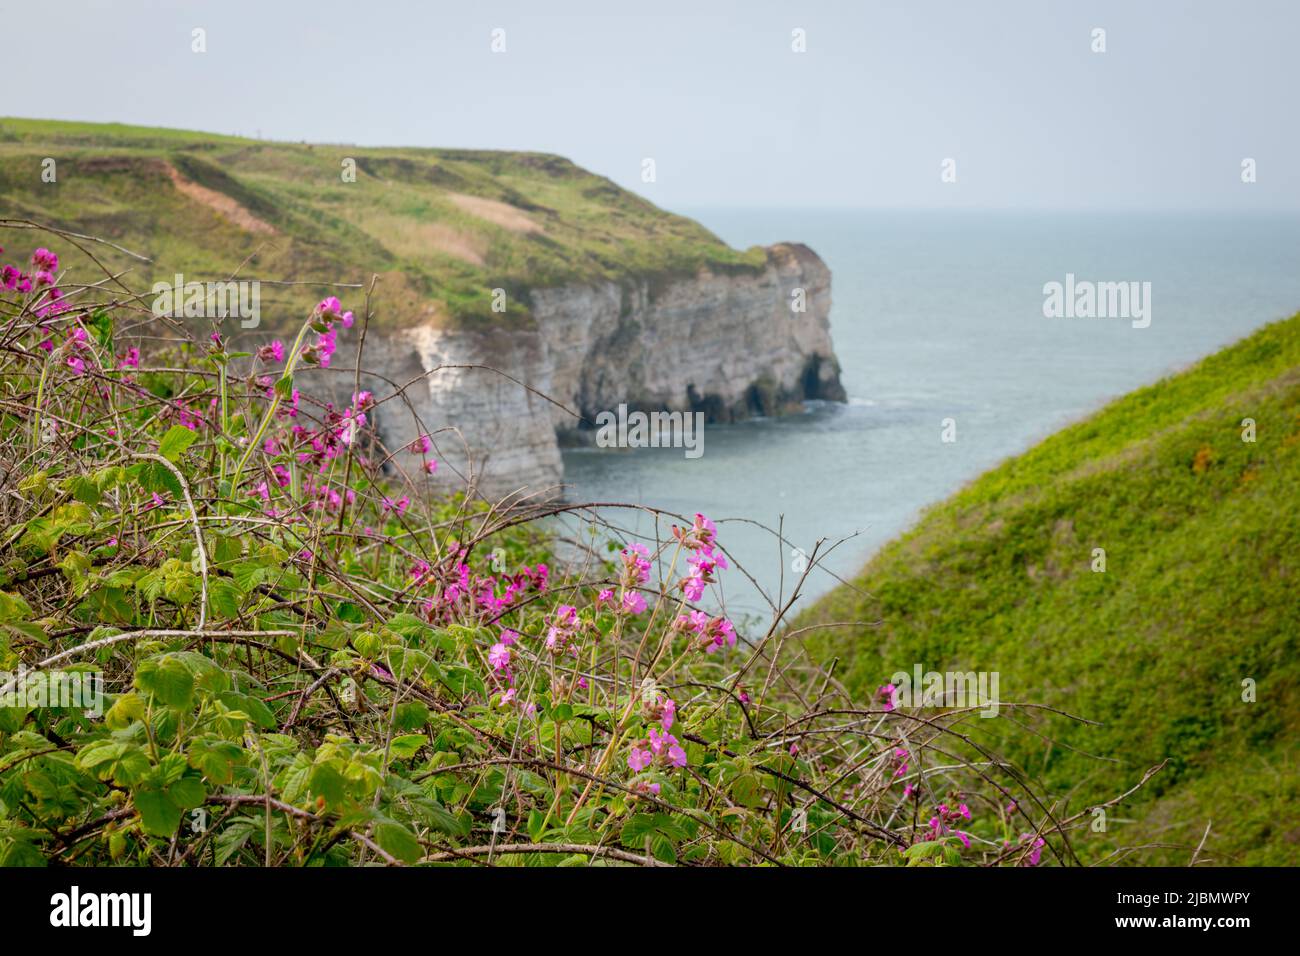 Landscape of chalk cliffs and the North Sea at Flamborough Head with Red Campion flowers in the foreground Stock Photo